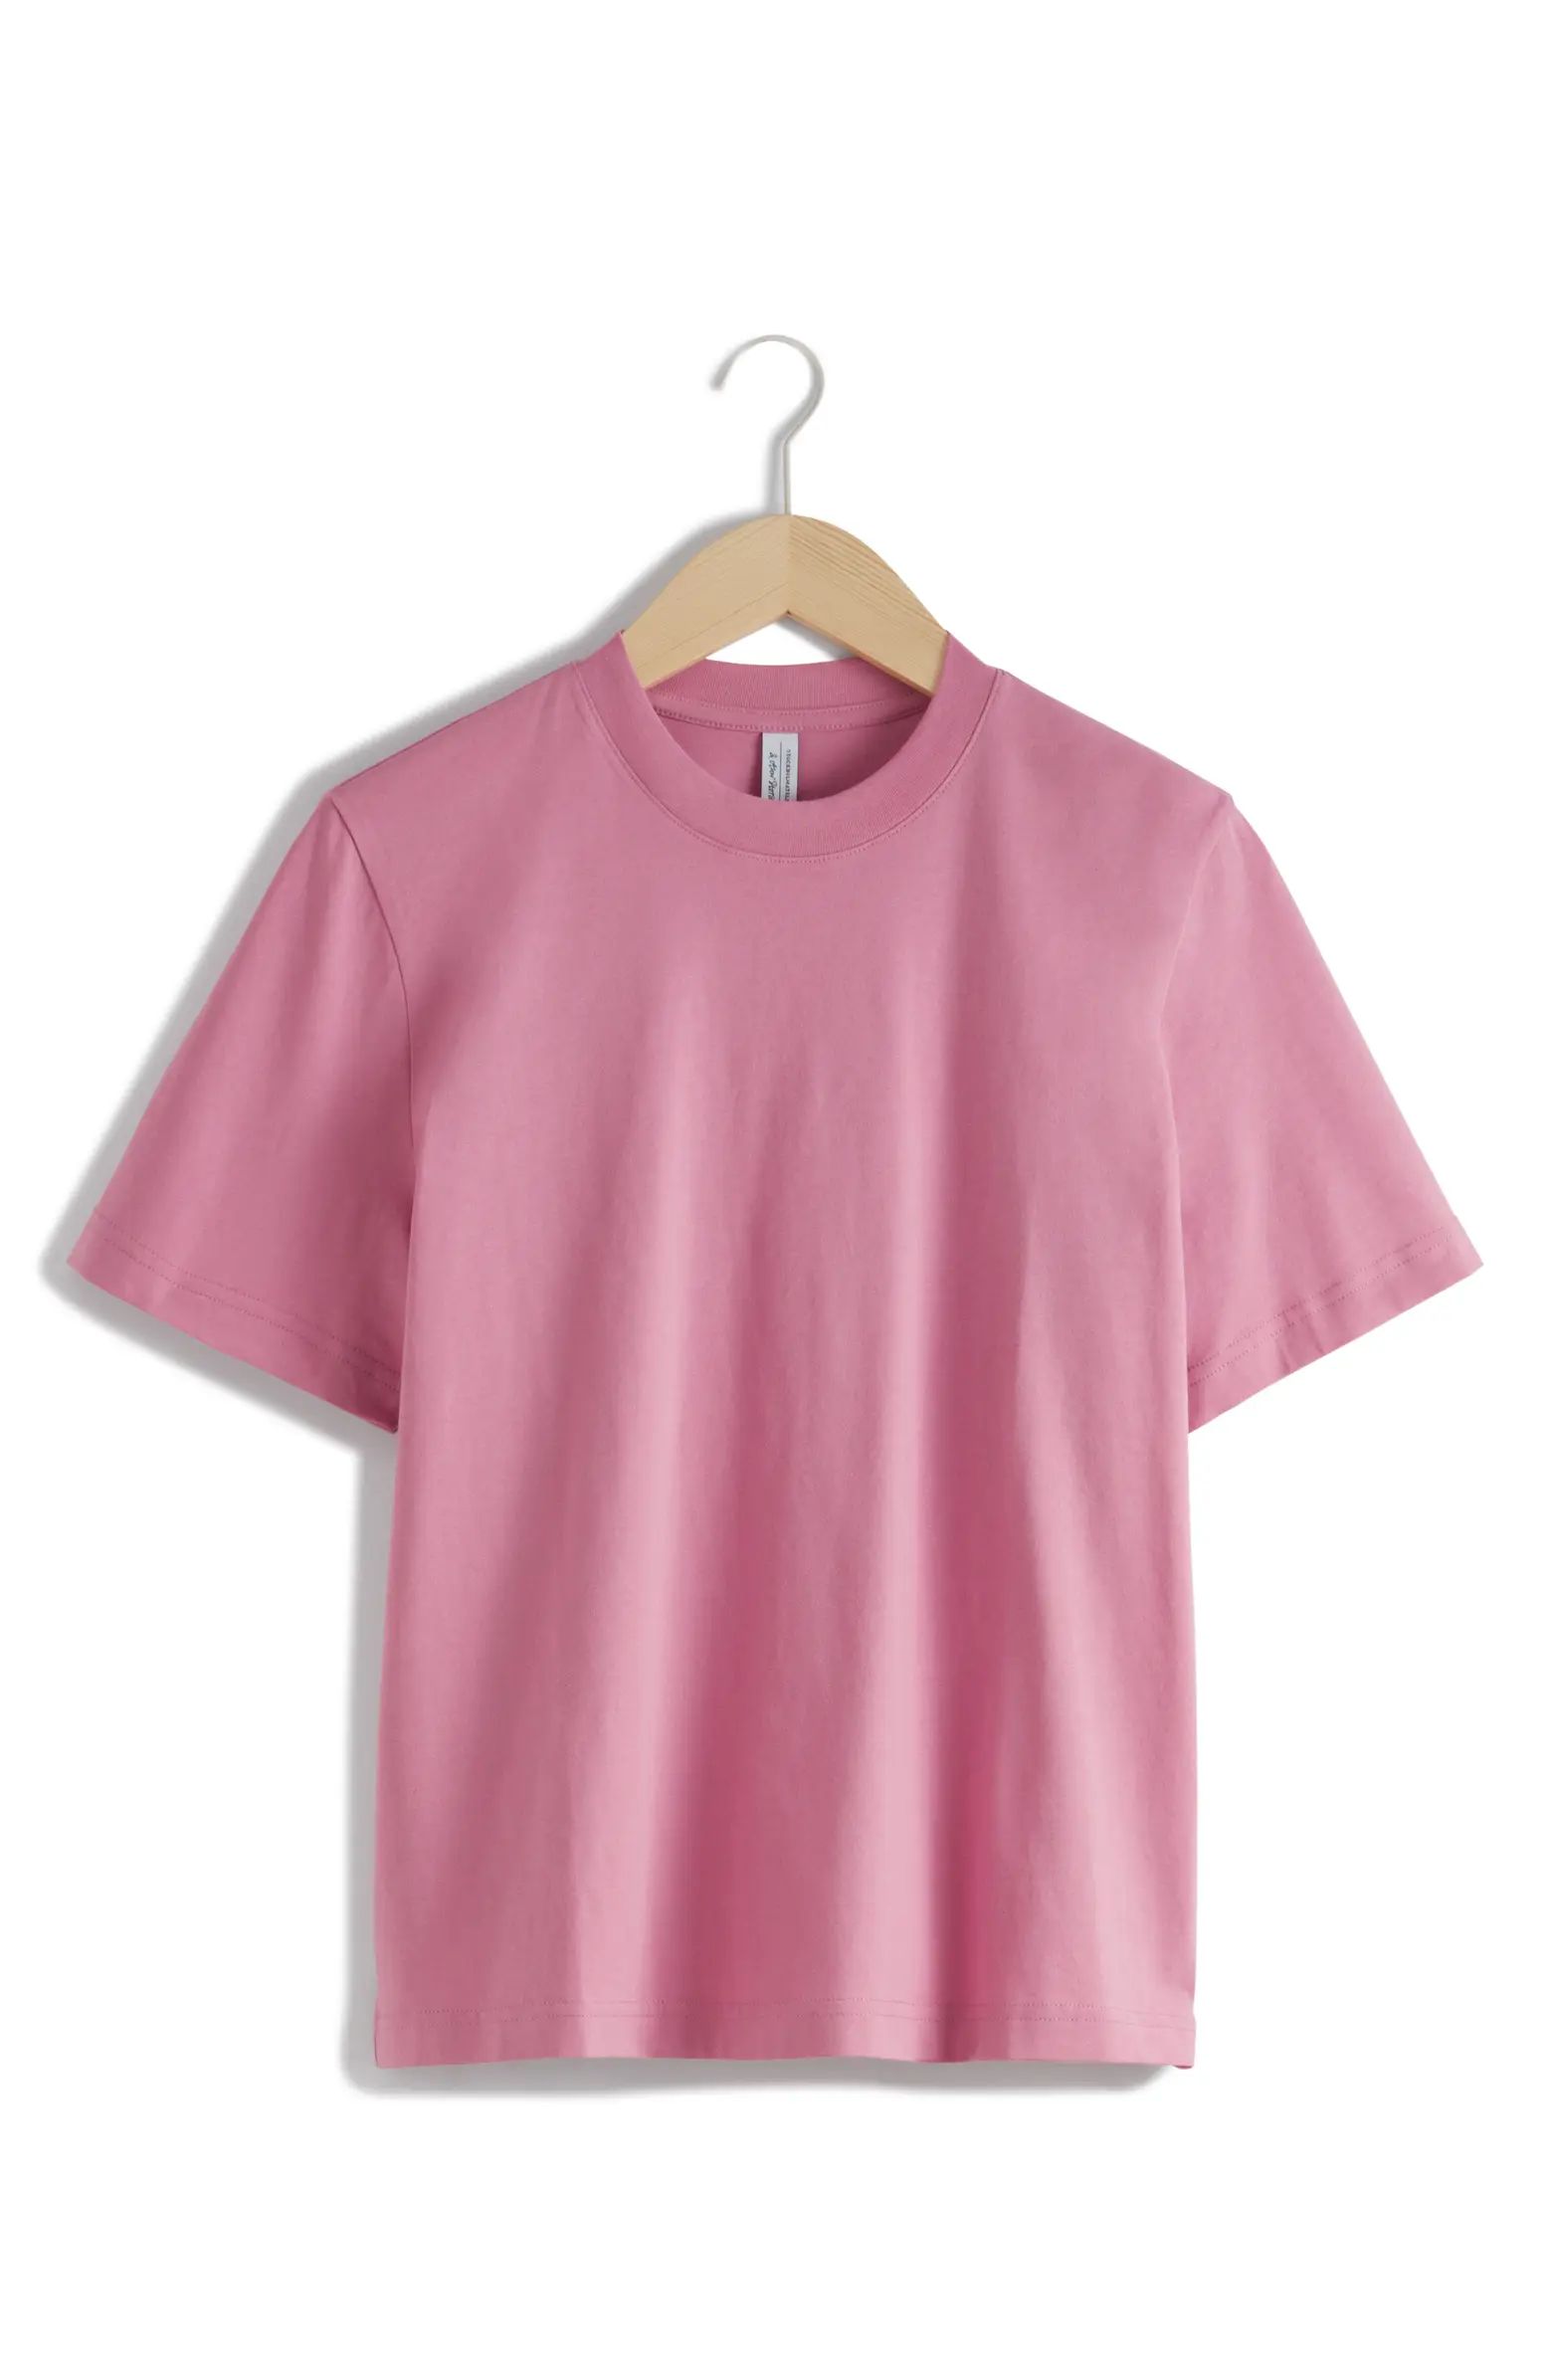 & Other Stories Lilly Cotton T-Shirt | Nordstrom | Nordstrom